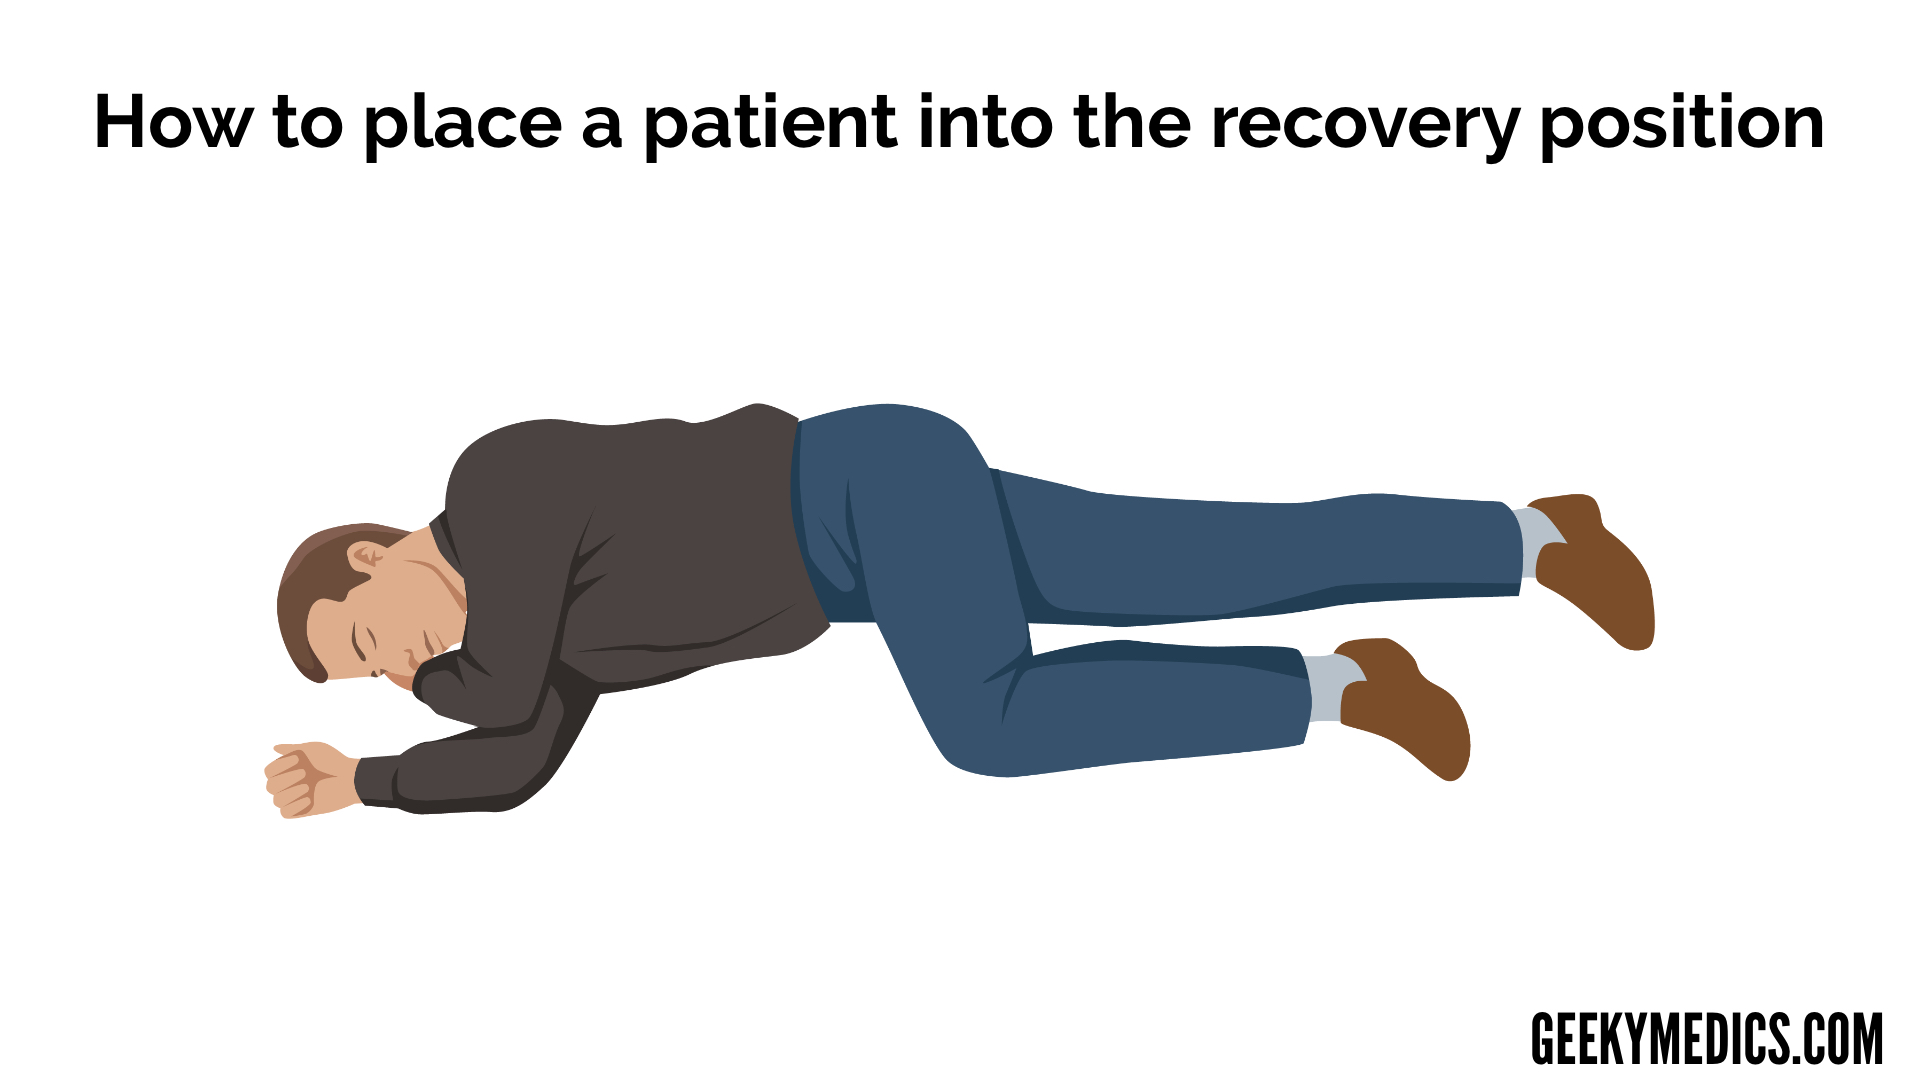 Recovery Position - OSCE Guide | Basic Life Support | Geeky Medics